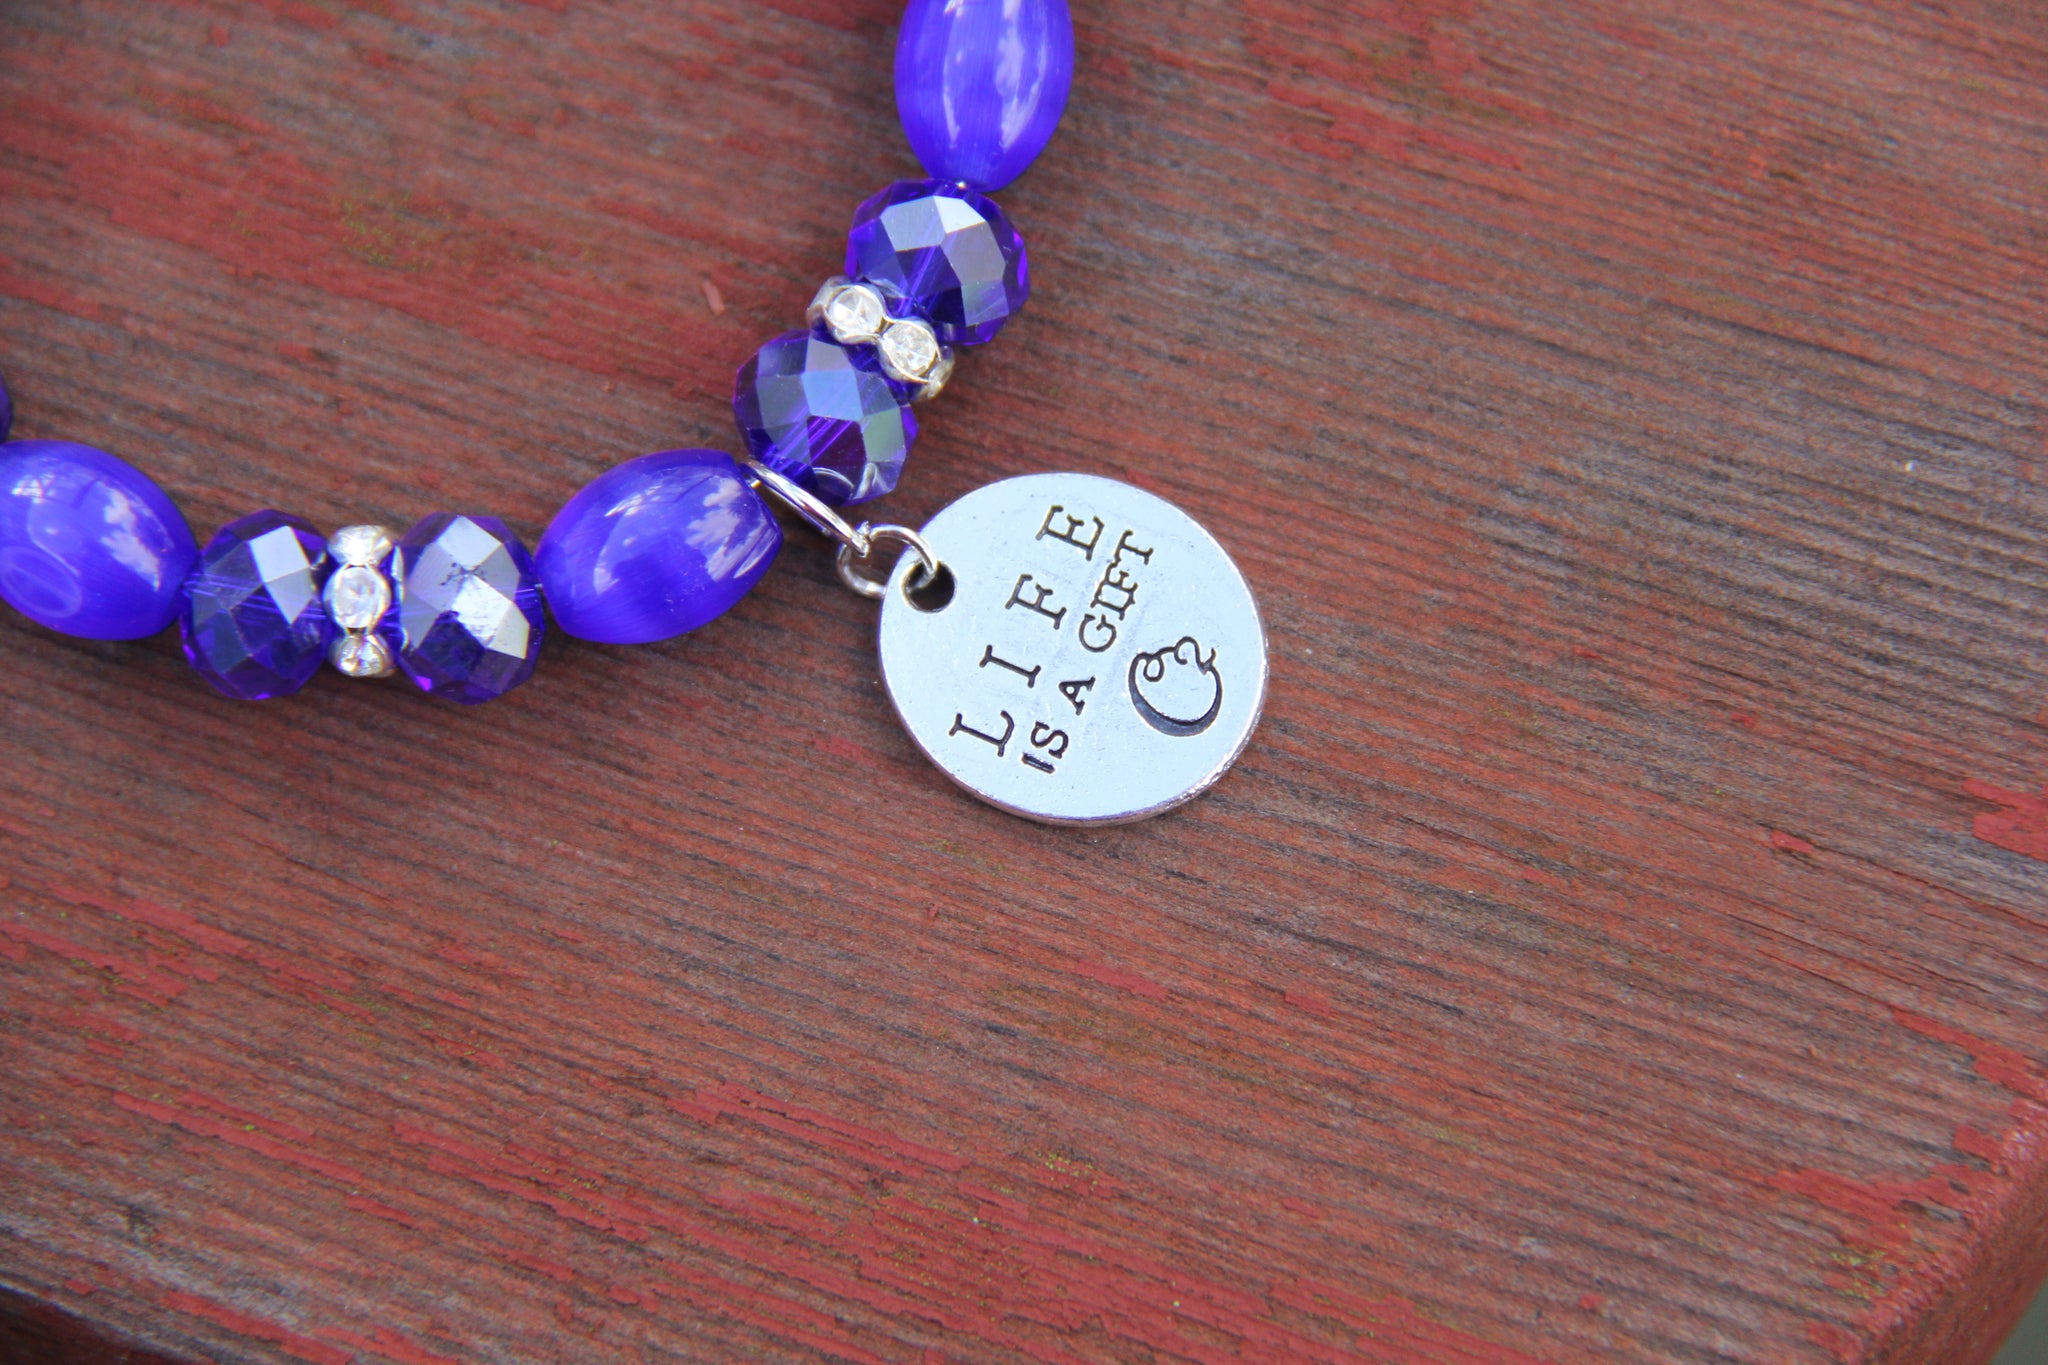 Navy blue glass beads with "Life is a gift" silver charm bottle bracelet